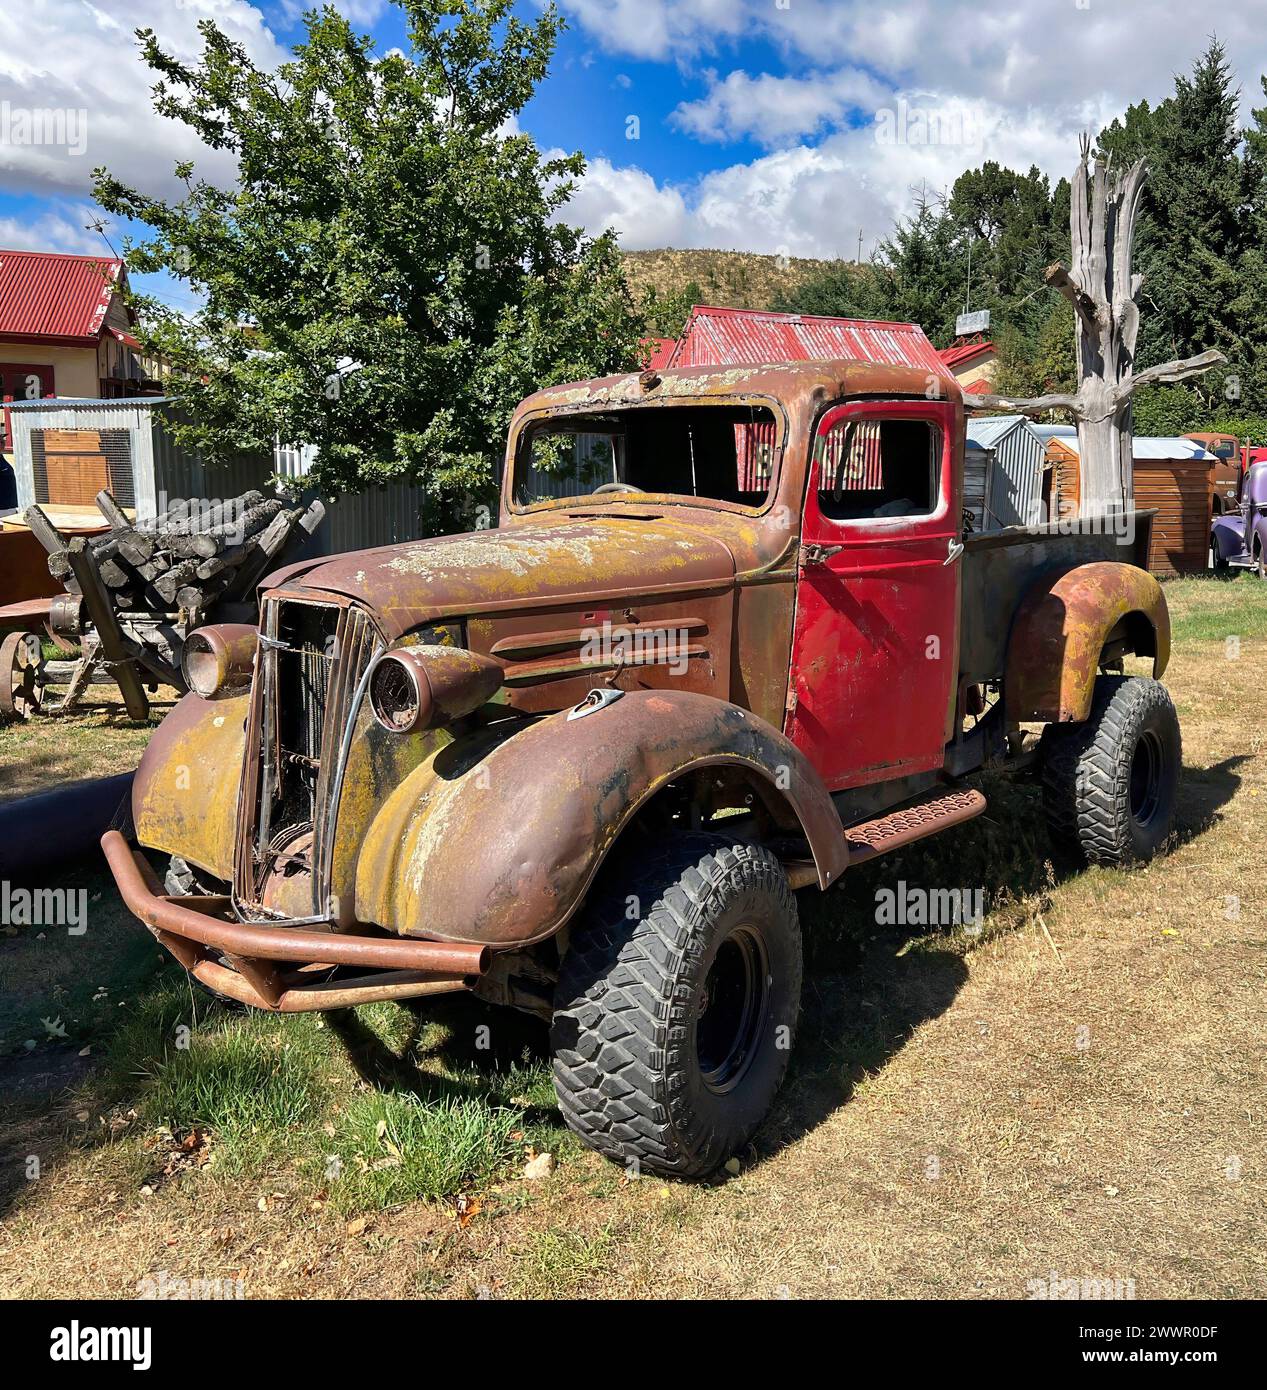 Vintage truck standing in a junk yard Stock Photo